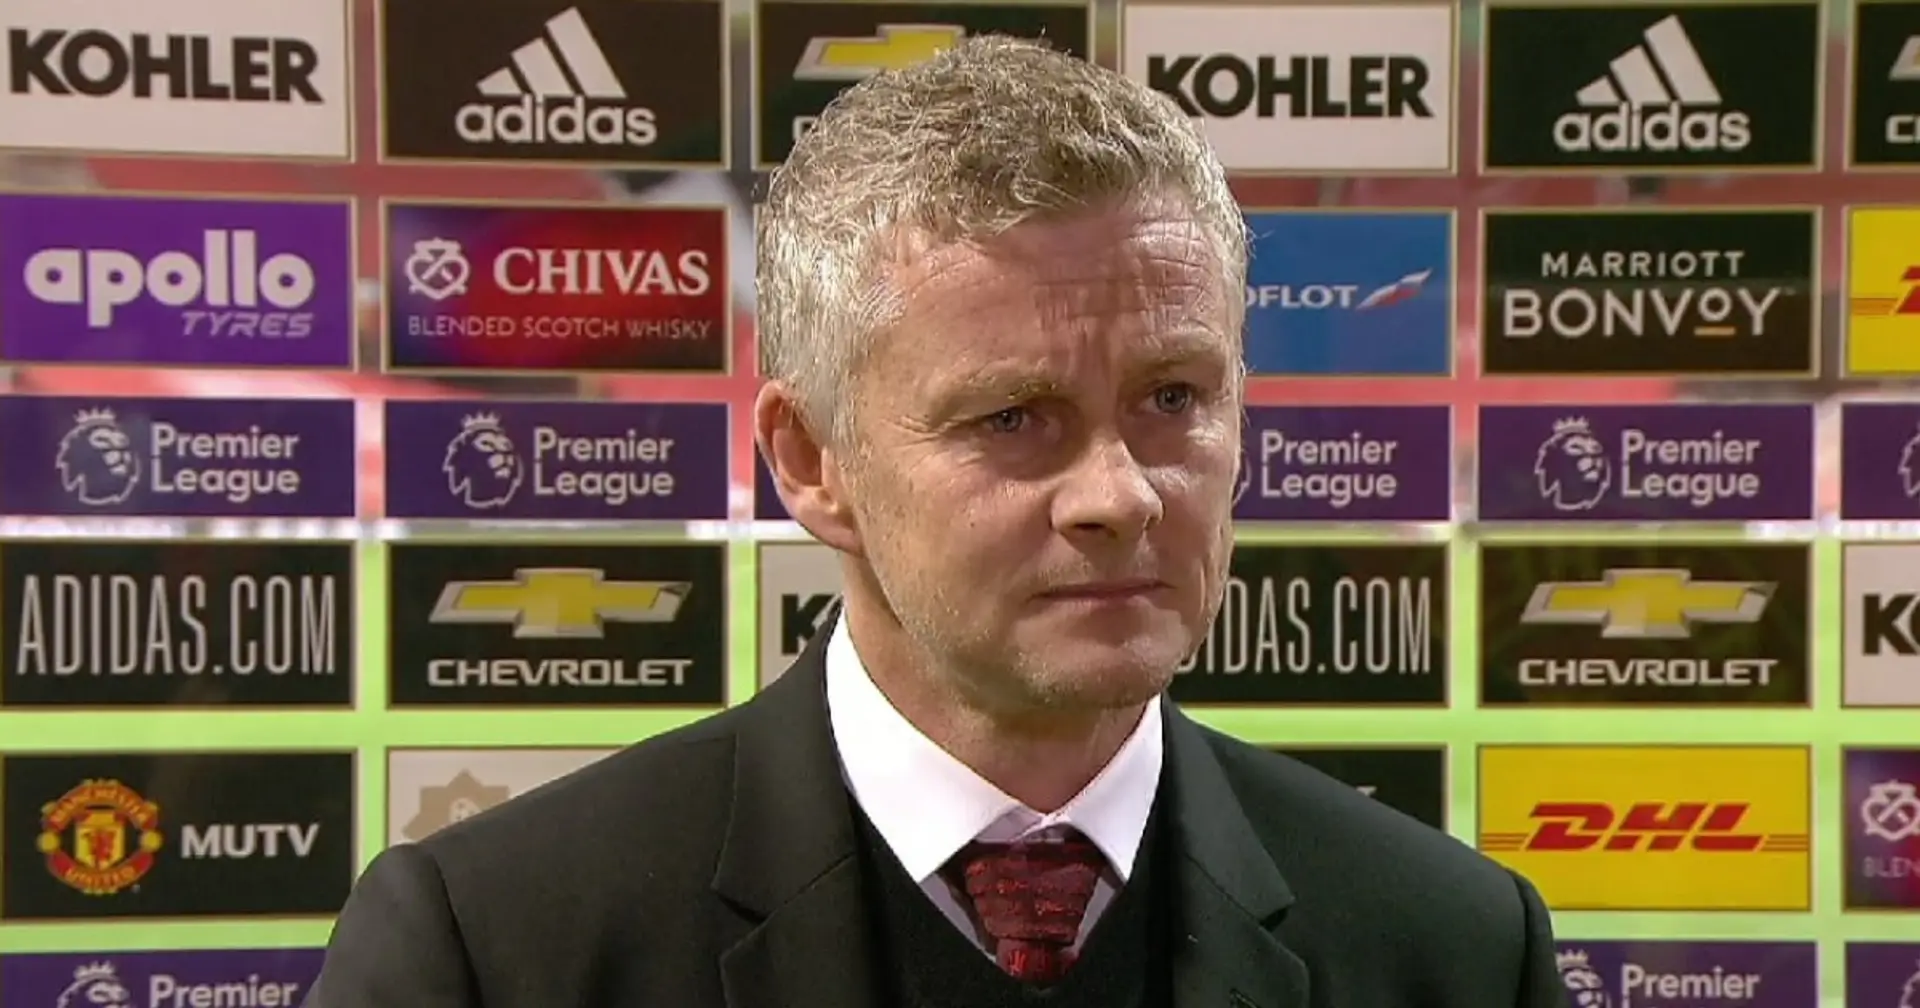 Solskjaer on transfers: 'It has hammered home we need to improve. That is not good enough'